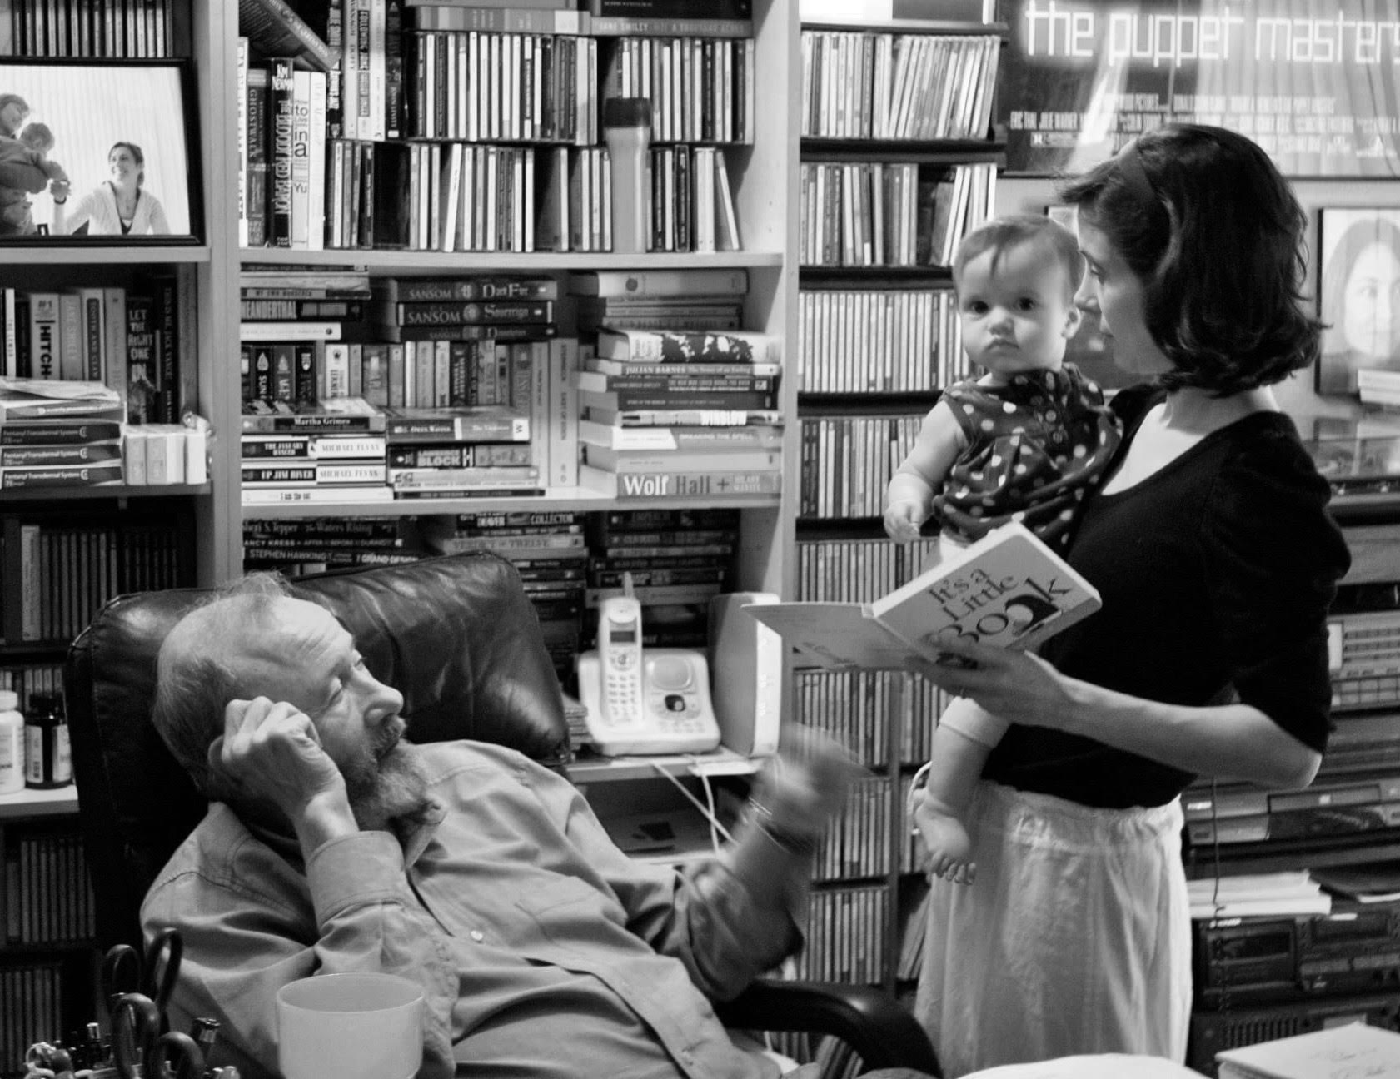 Leslie with her daughter and father in front of bookshelves